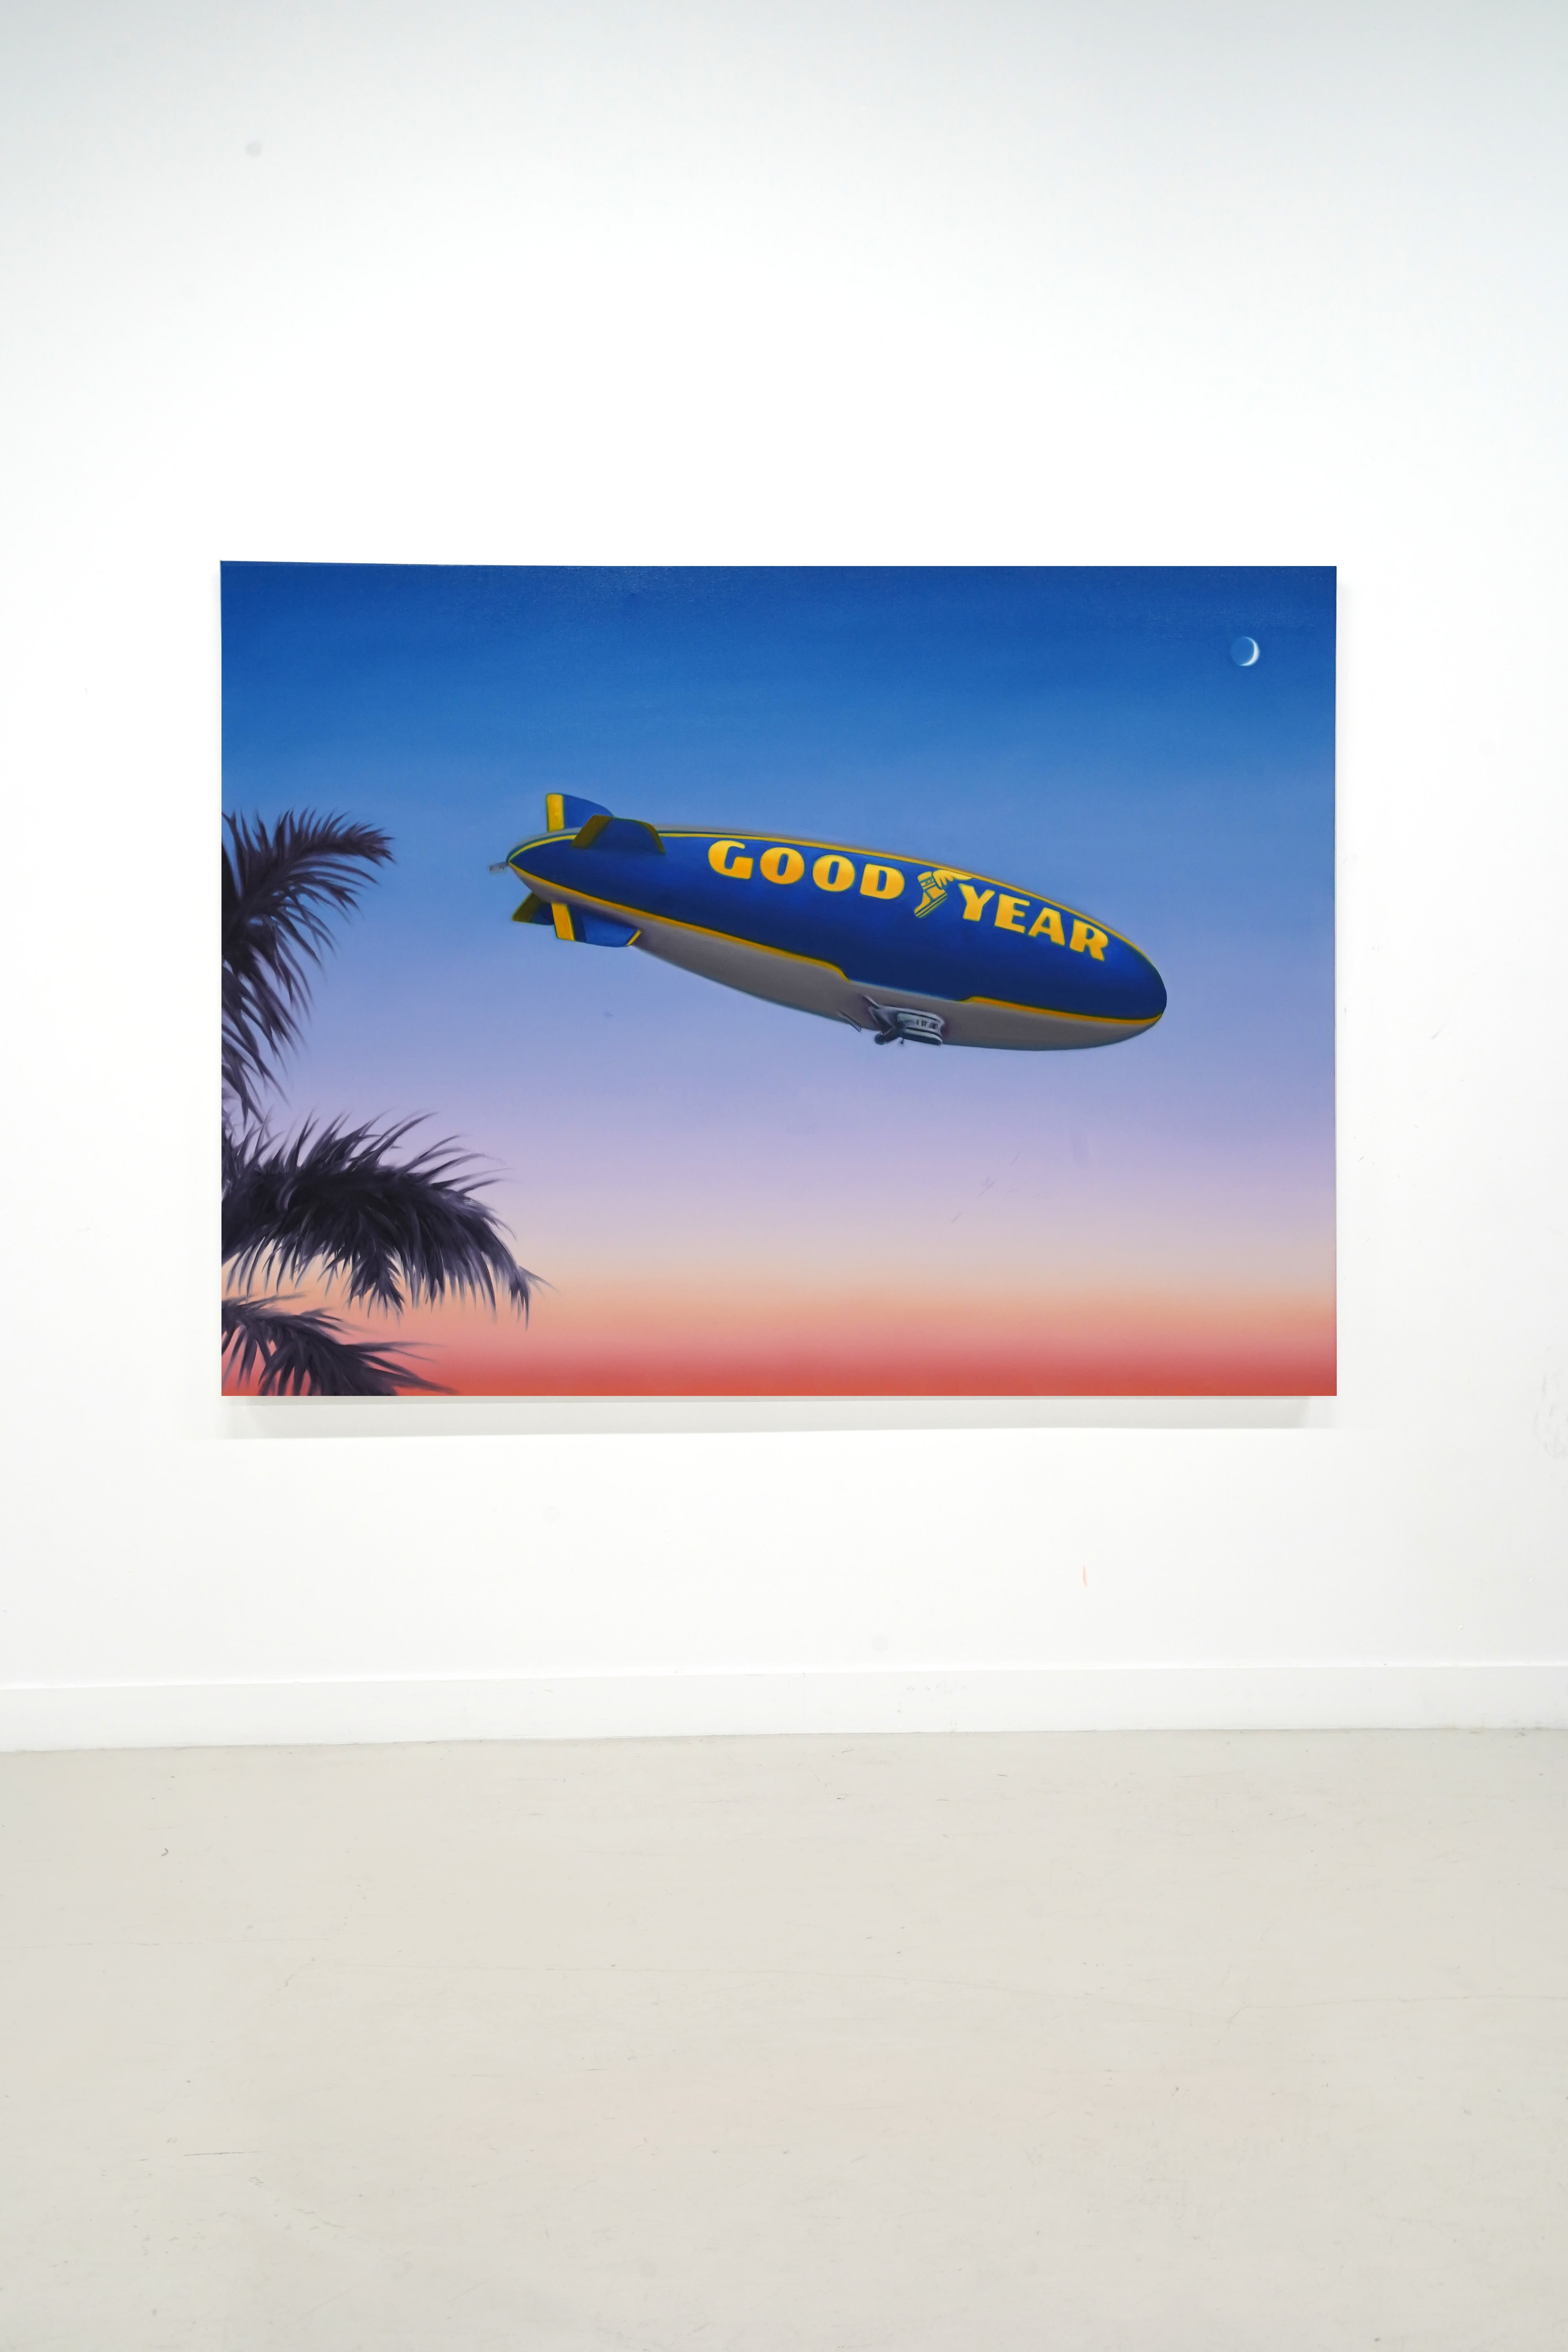 Goodyear blimp painting in the sky by daniel antelo